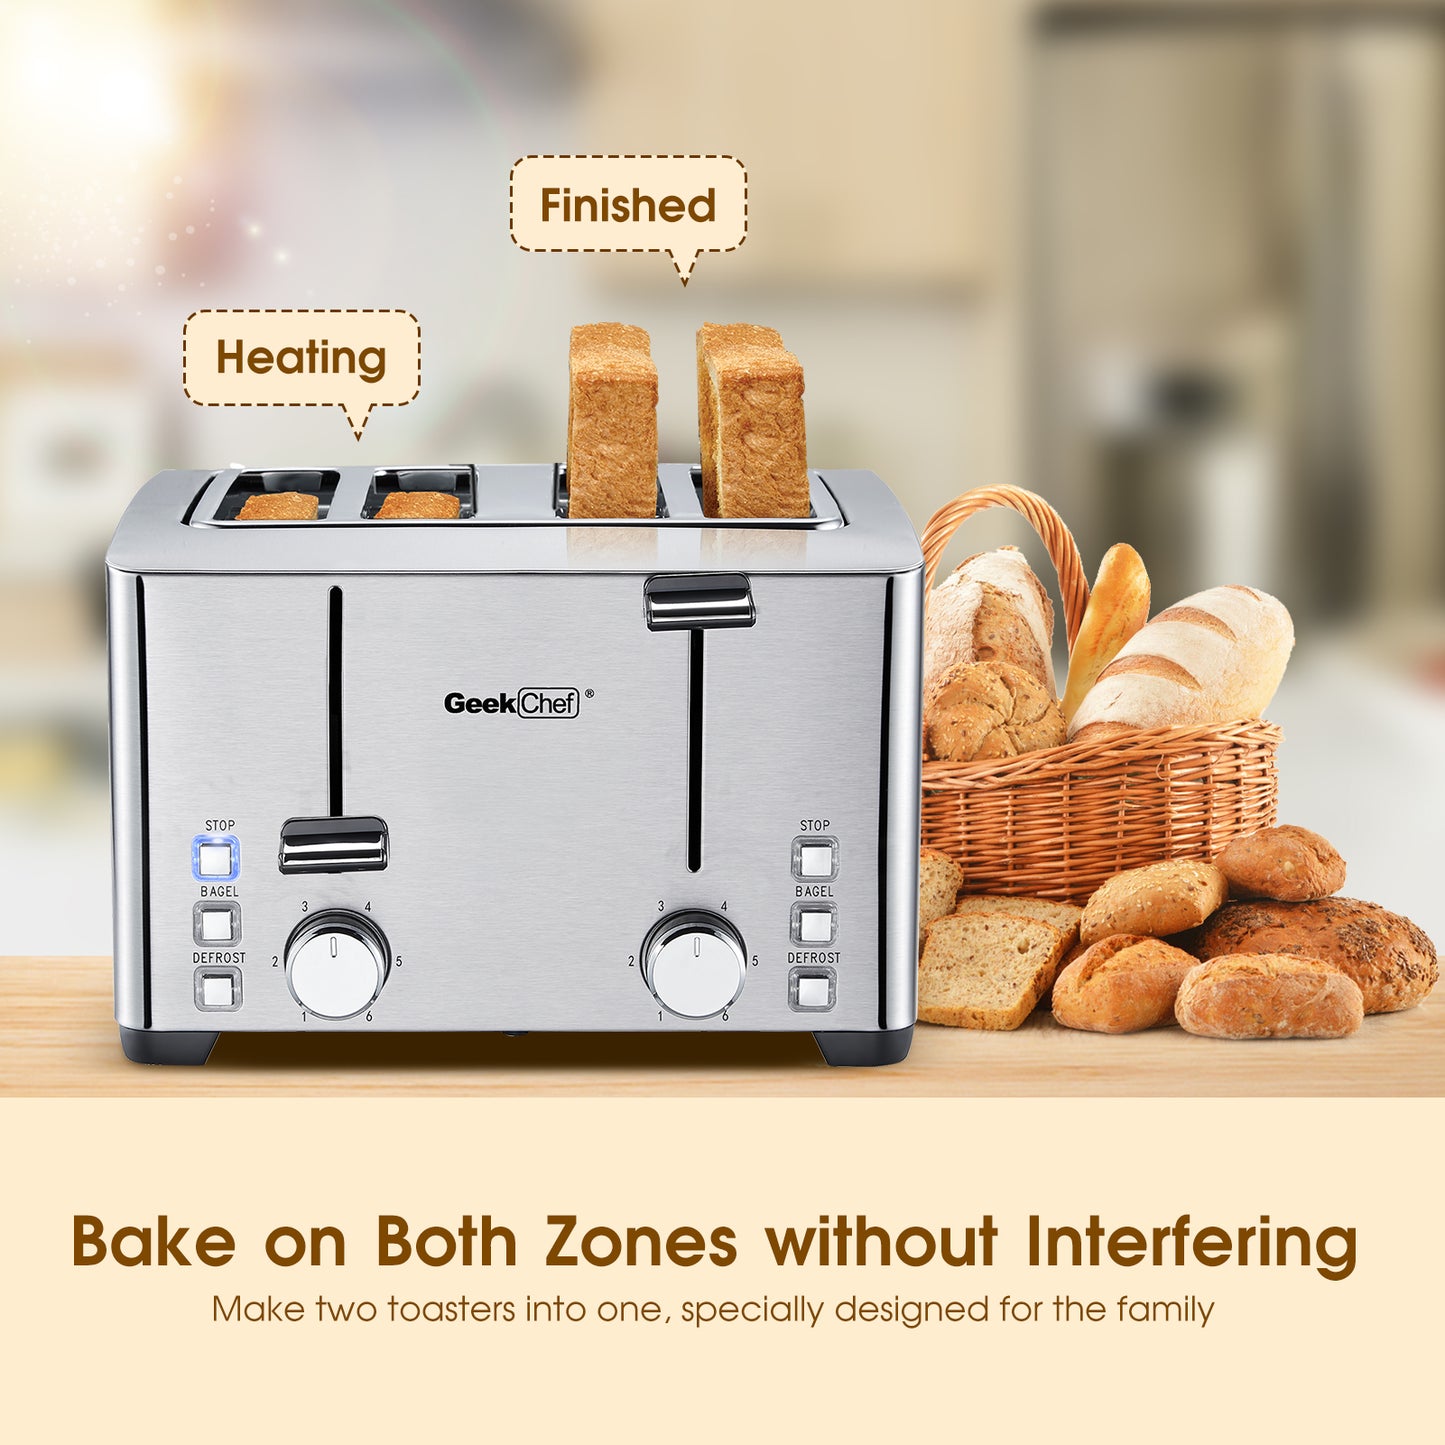 Geek Chef 4 Slice Toaster, Stainless Steel Bread Bagel Toaster with Warming Rack, 6 Shade Settings, 4 Extra Wide Slots, Removable Crumb Tray, Bagel/Defrost/Stop Function, 1500W